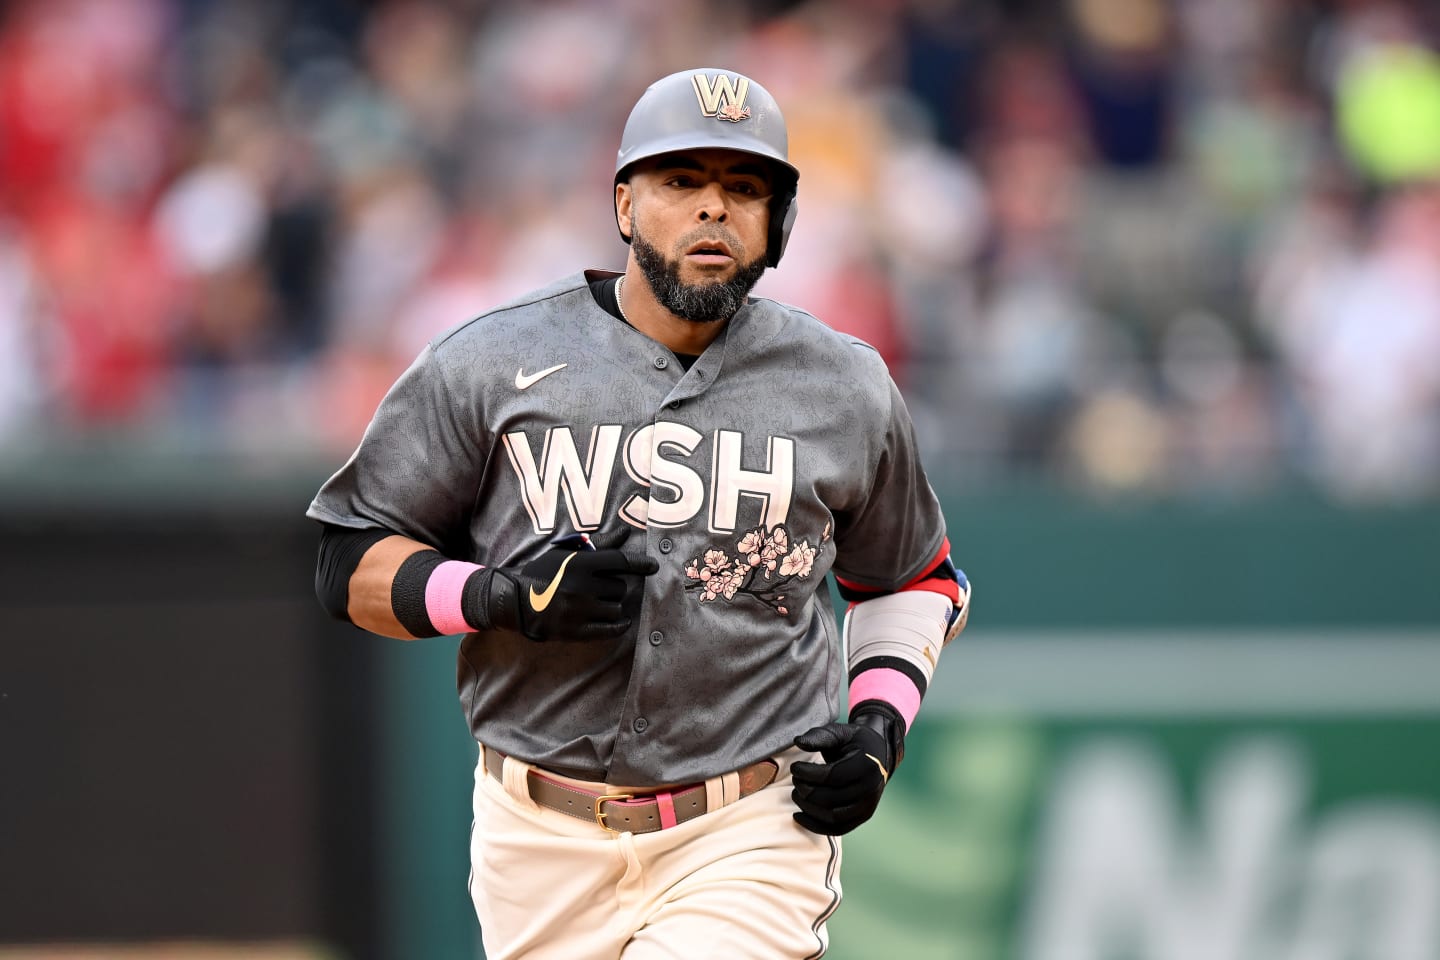 Ten fun facts about newest Twin Nelson Cruz - Twinkie Town